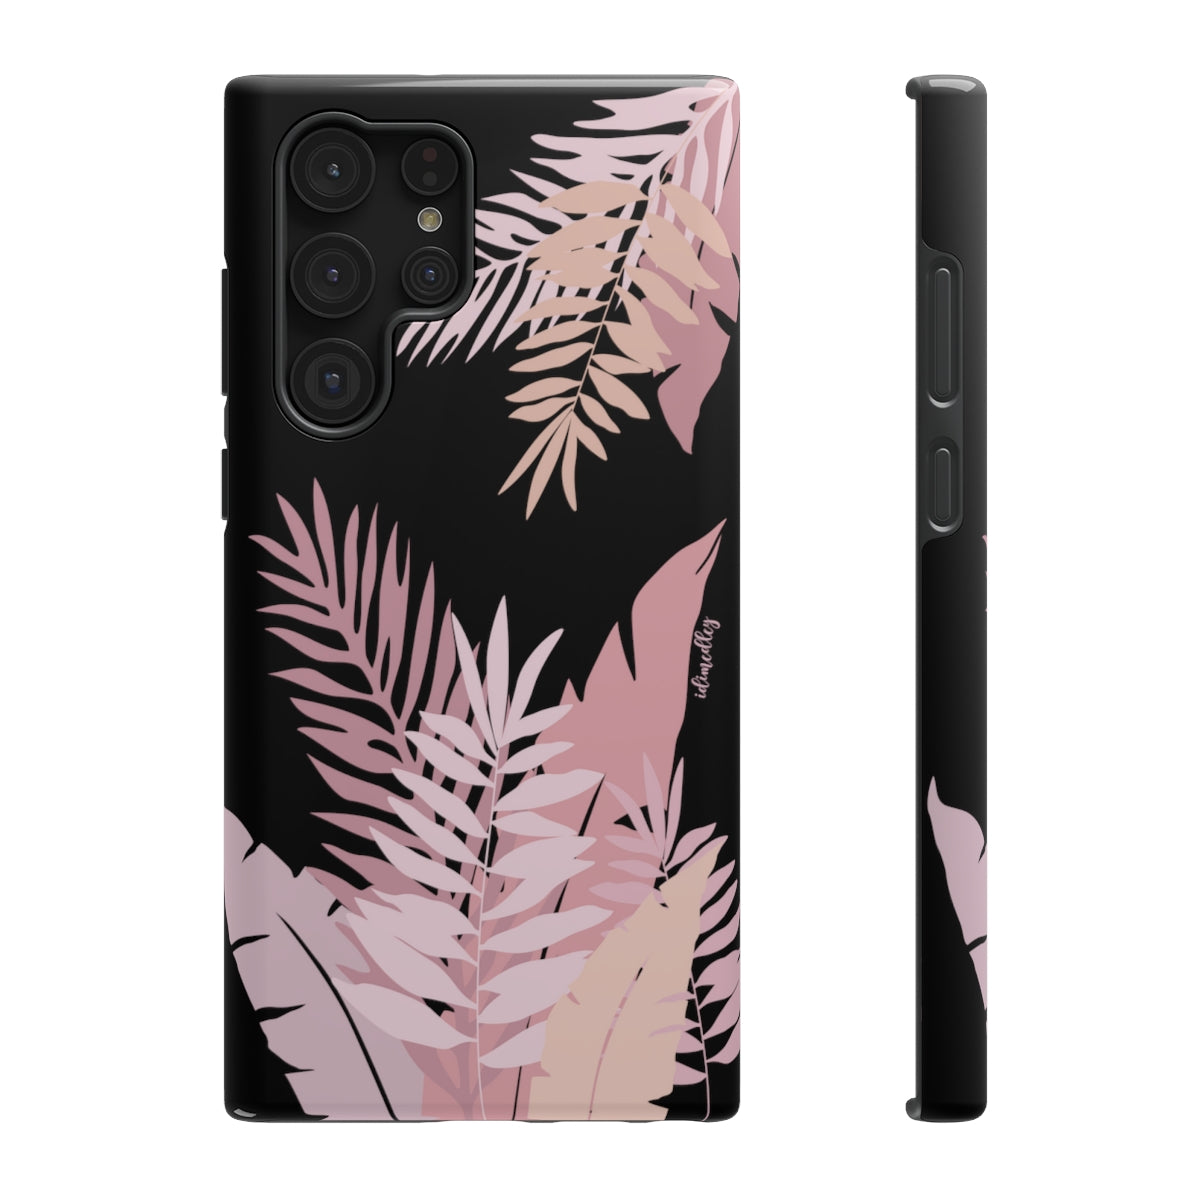 Whispering Leaves (Pink and Black)